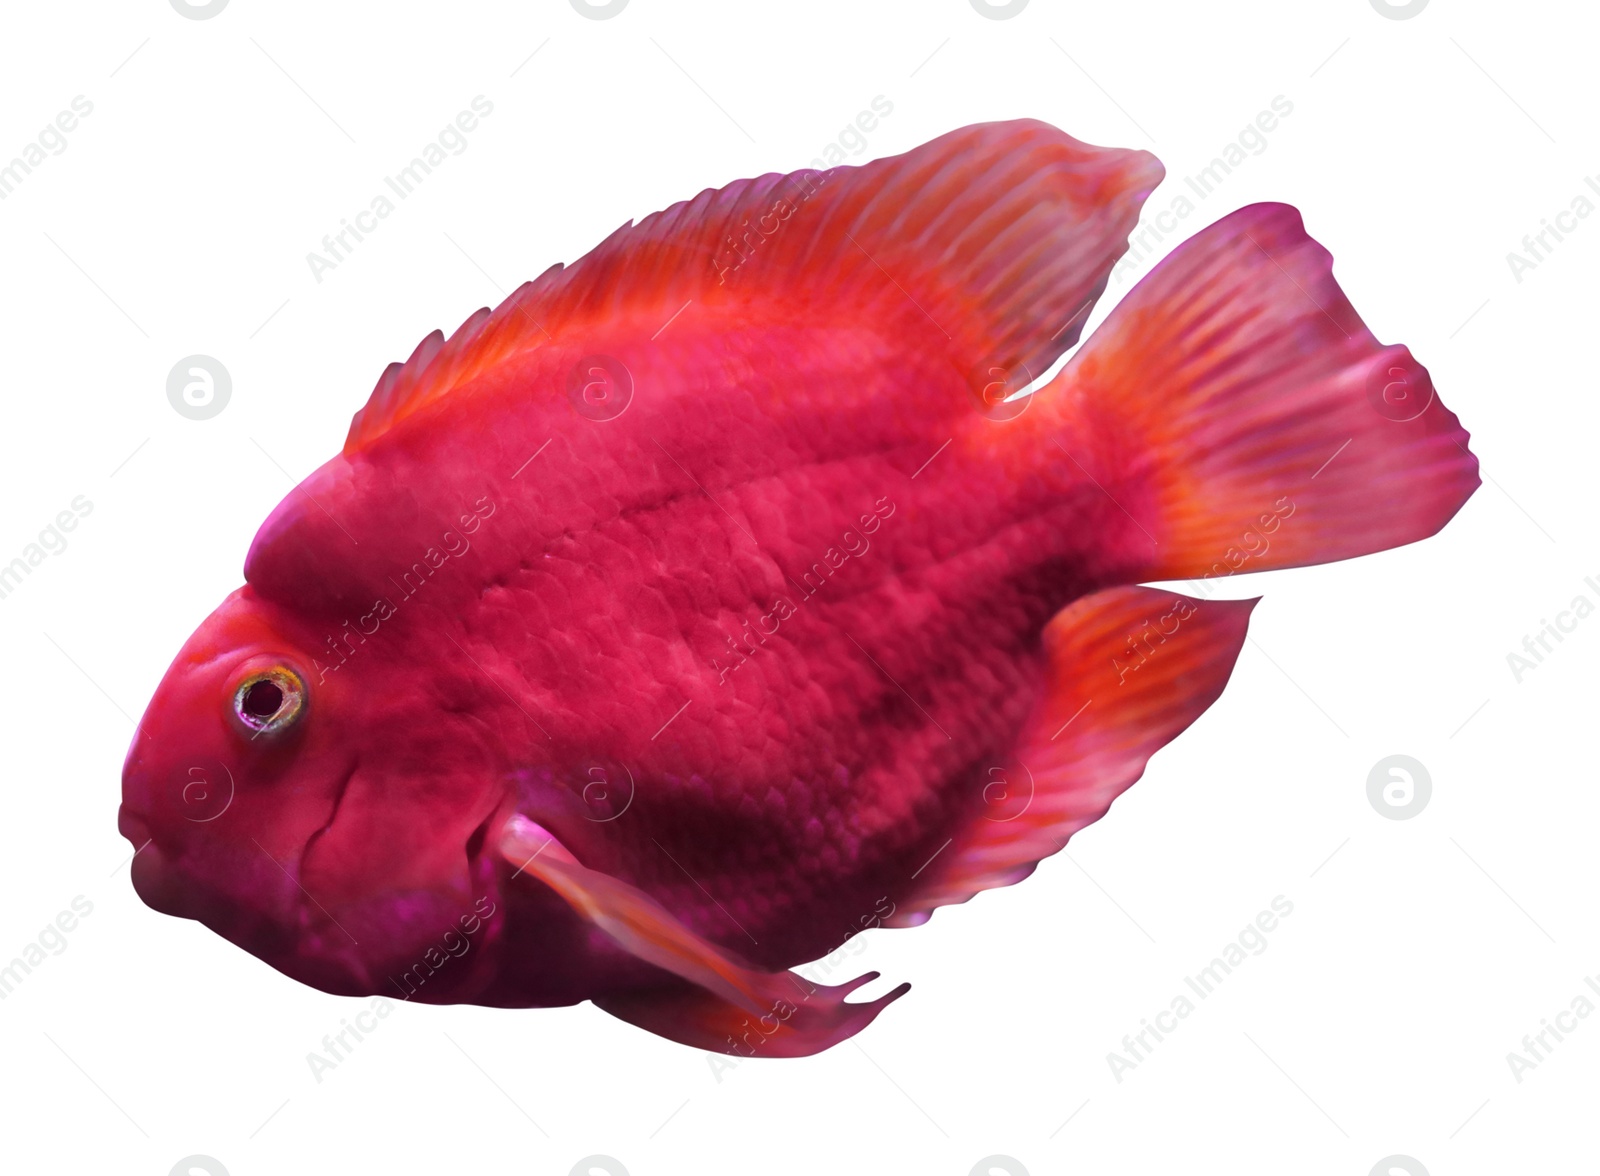 Image of Beautiful blood parrot cichlid fish on white background